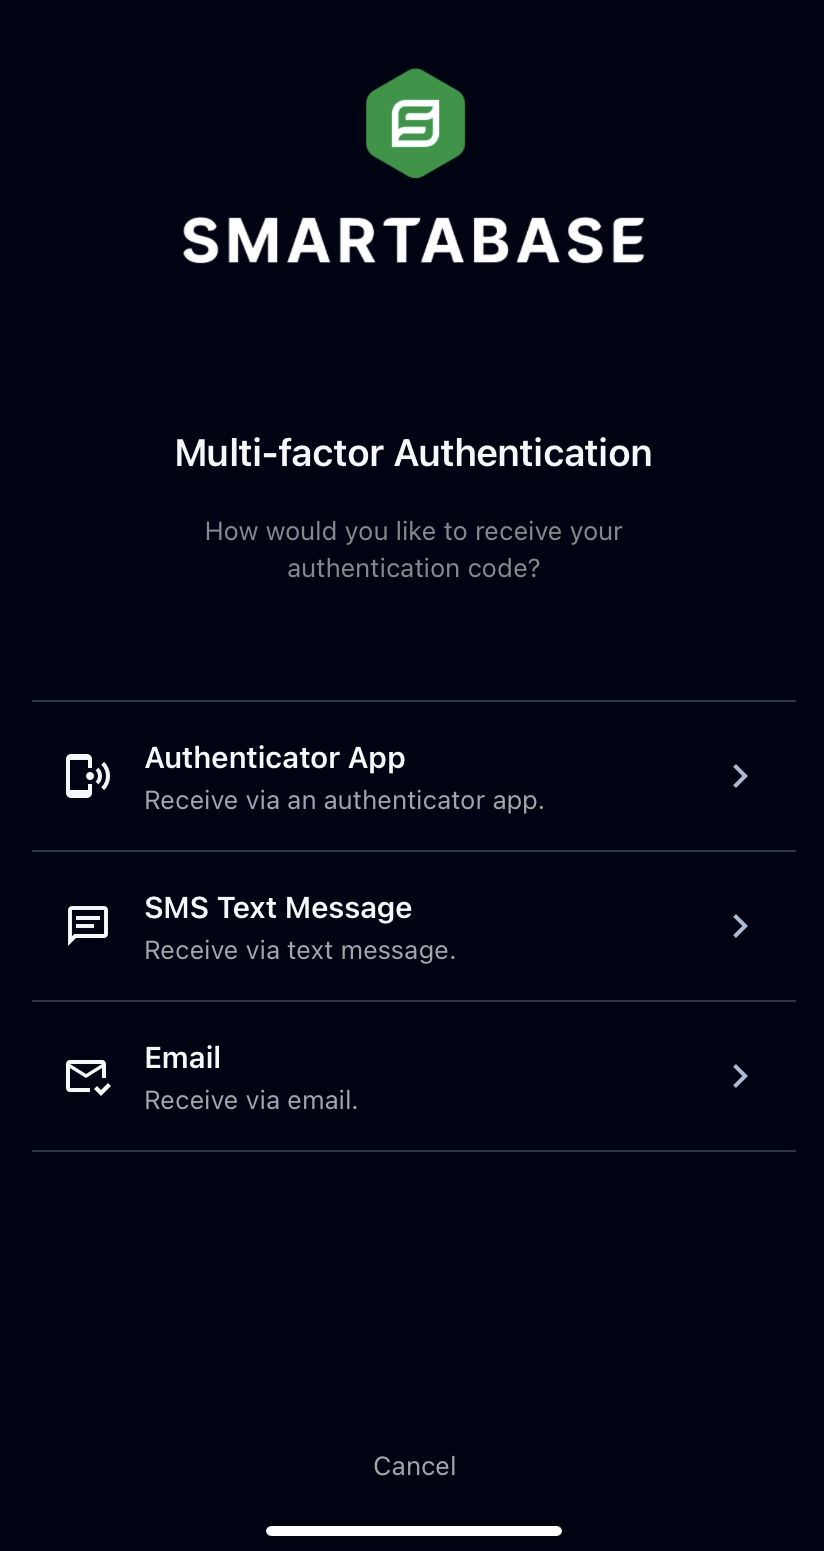 A screenshot of the multi-factor authentication set-up screen in the Smartabase app.